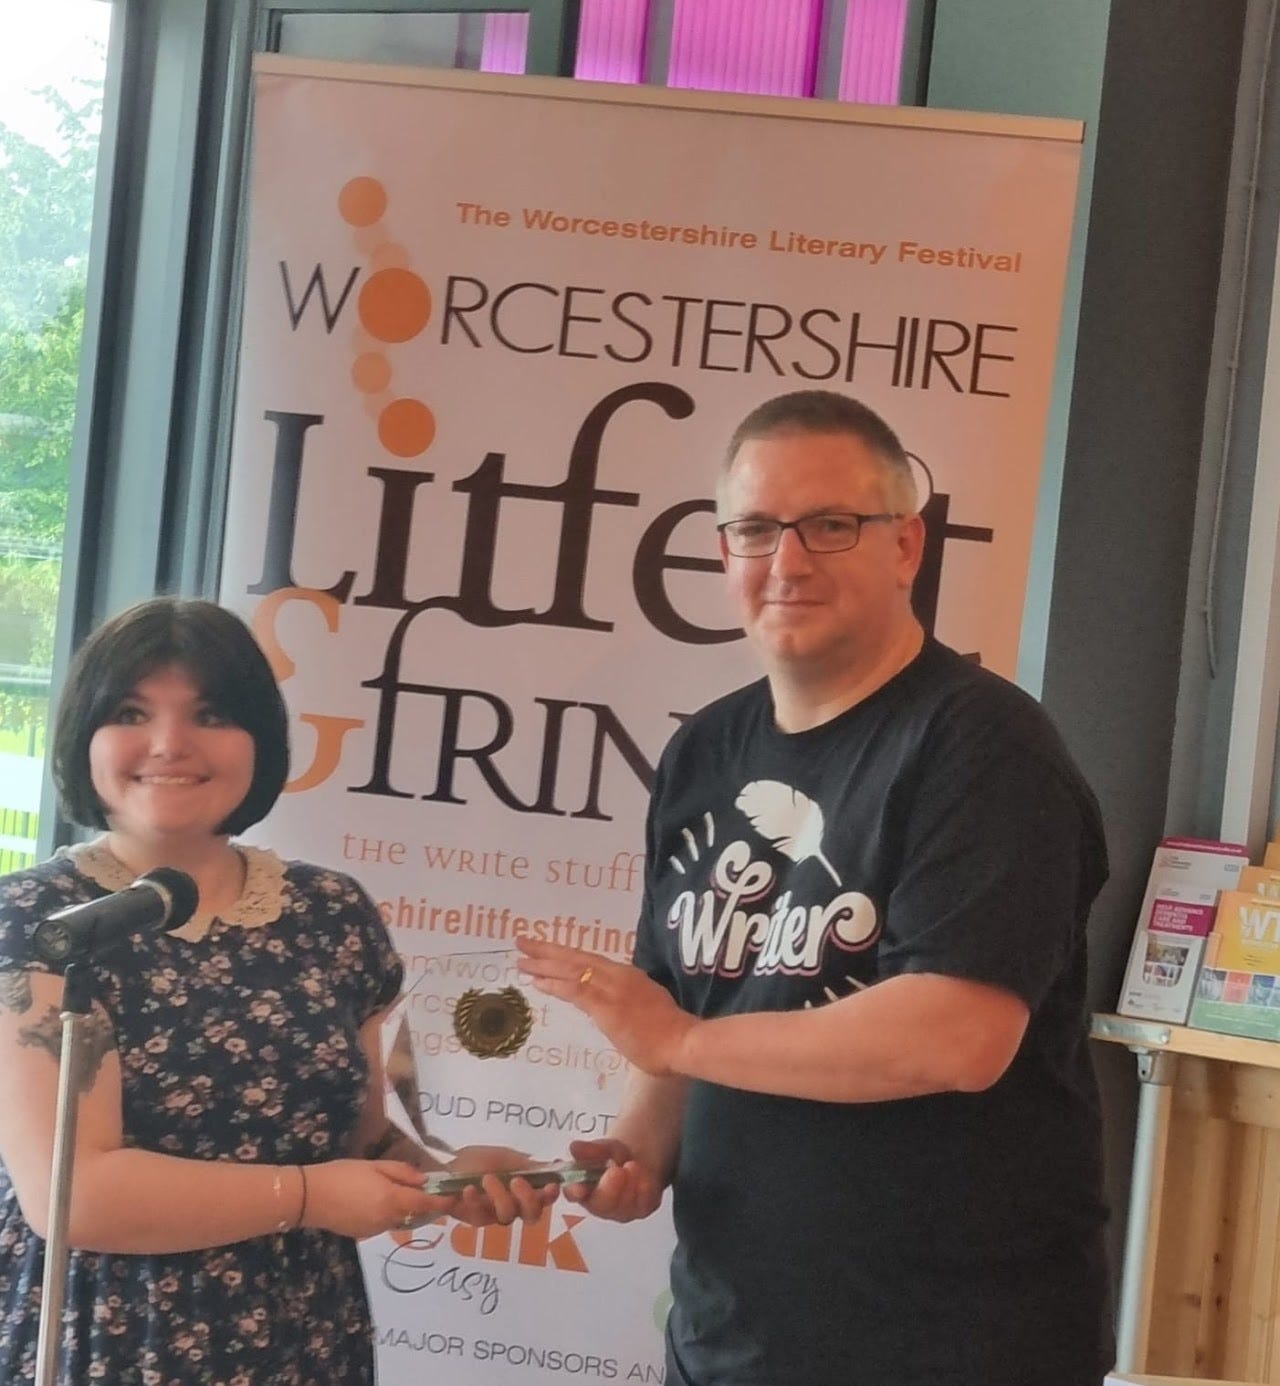 Damon Lord, receiving his trophy from the previous year’s Worcestershire Poet Laureate, Rhianna Levi.